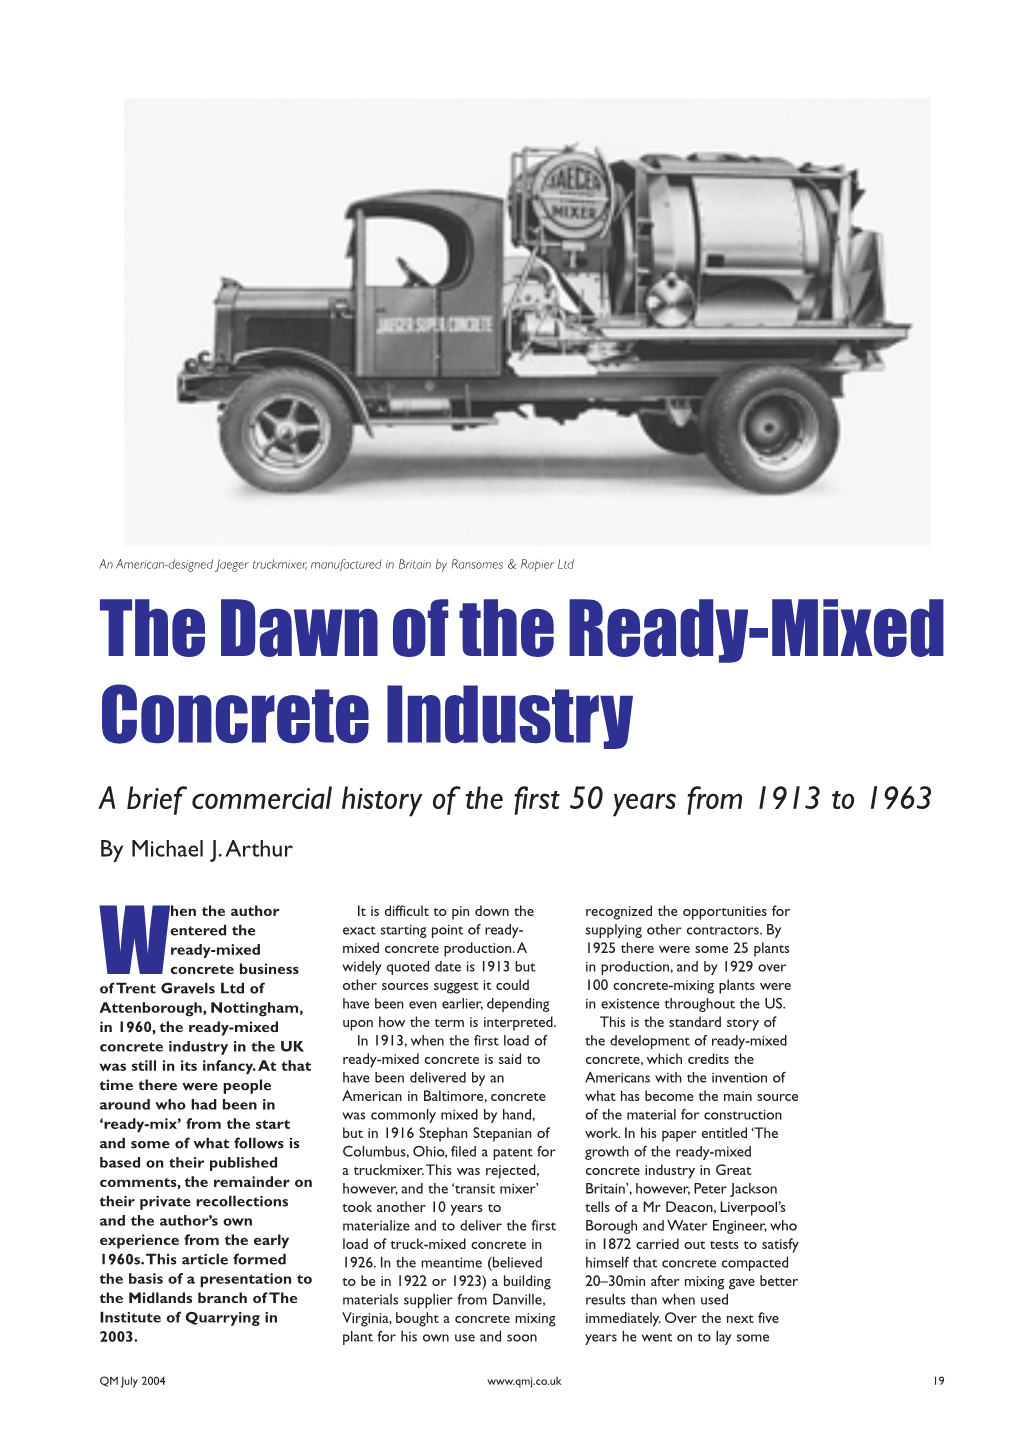 The Dawn of the Ready-Mixed Concrete Industry a Brief Commercial History of the First 50 Years from 1913 to 1963 by Michael J